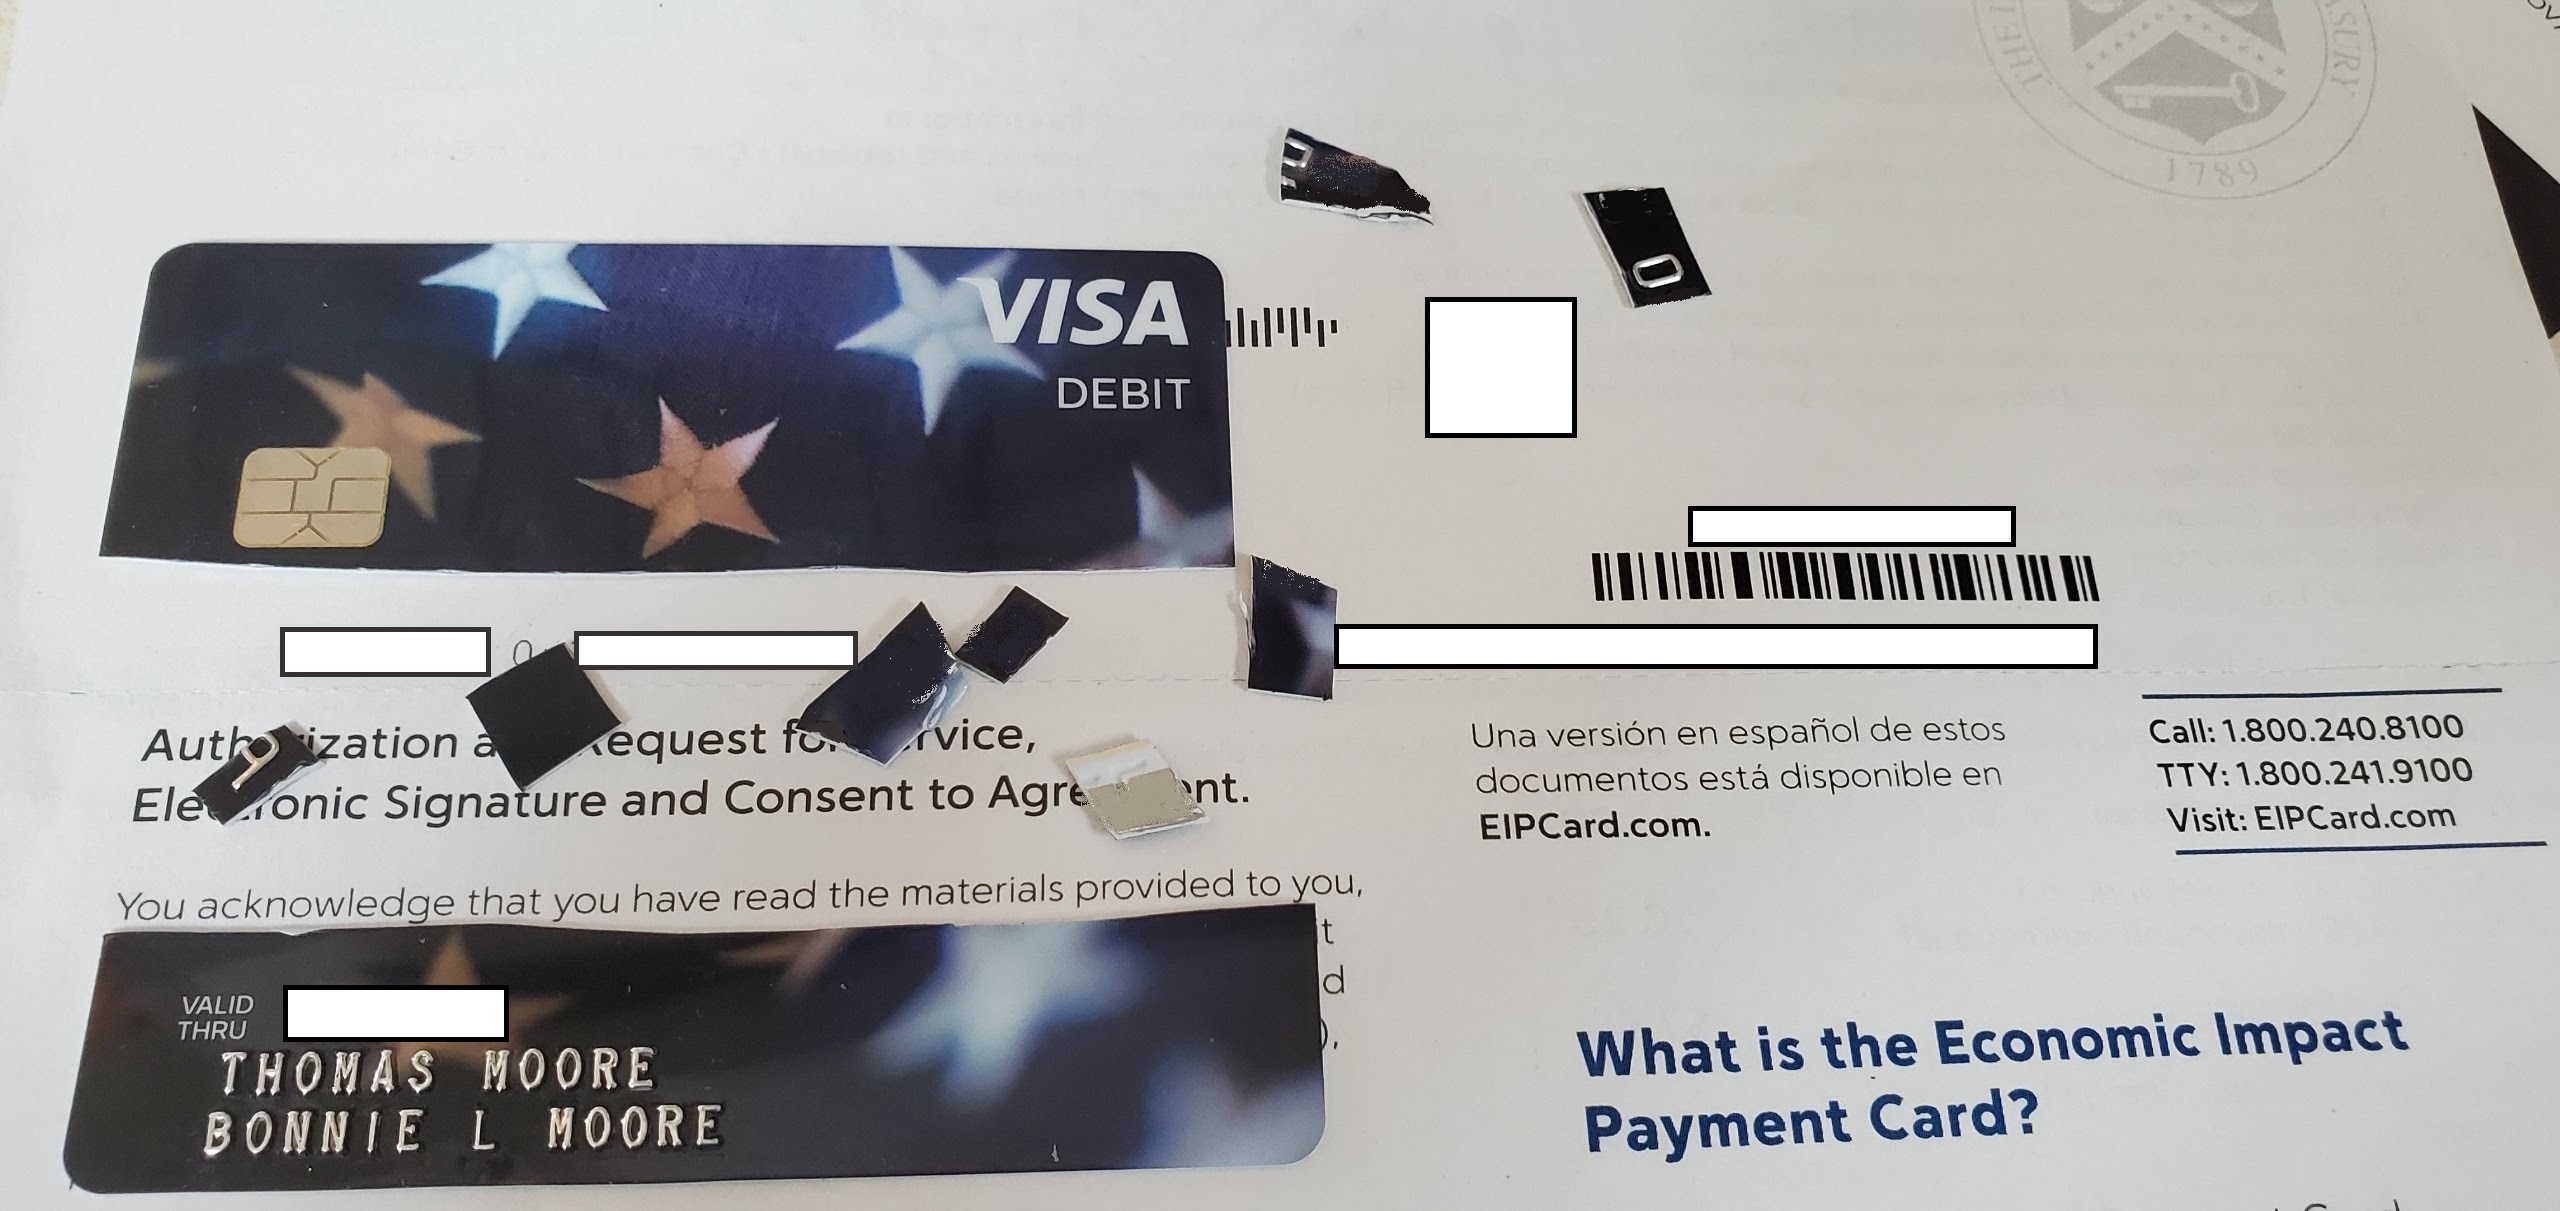 Don't cut up that card! People mistaking stimulus debit card for junk mail